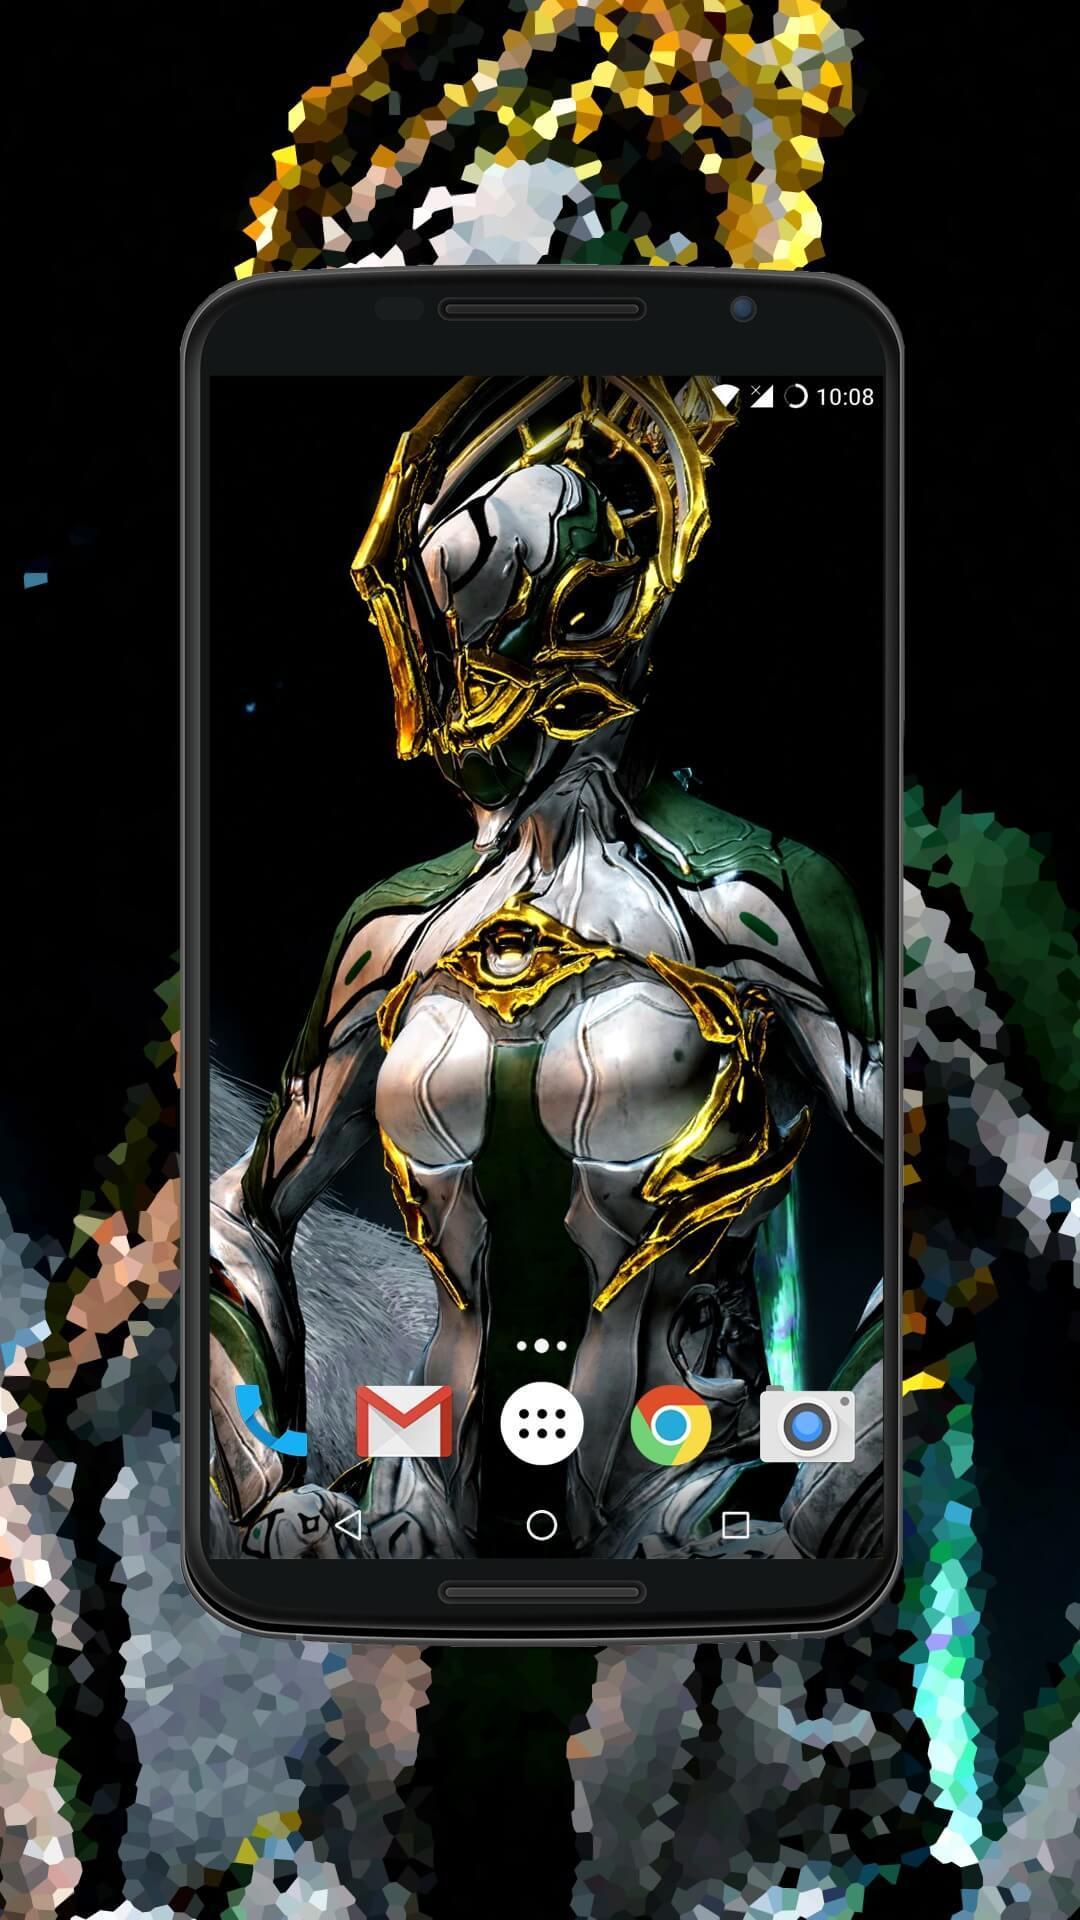 warframe wallpaper for android apk download